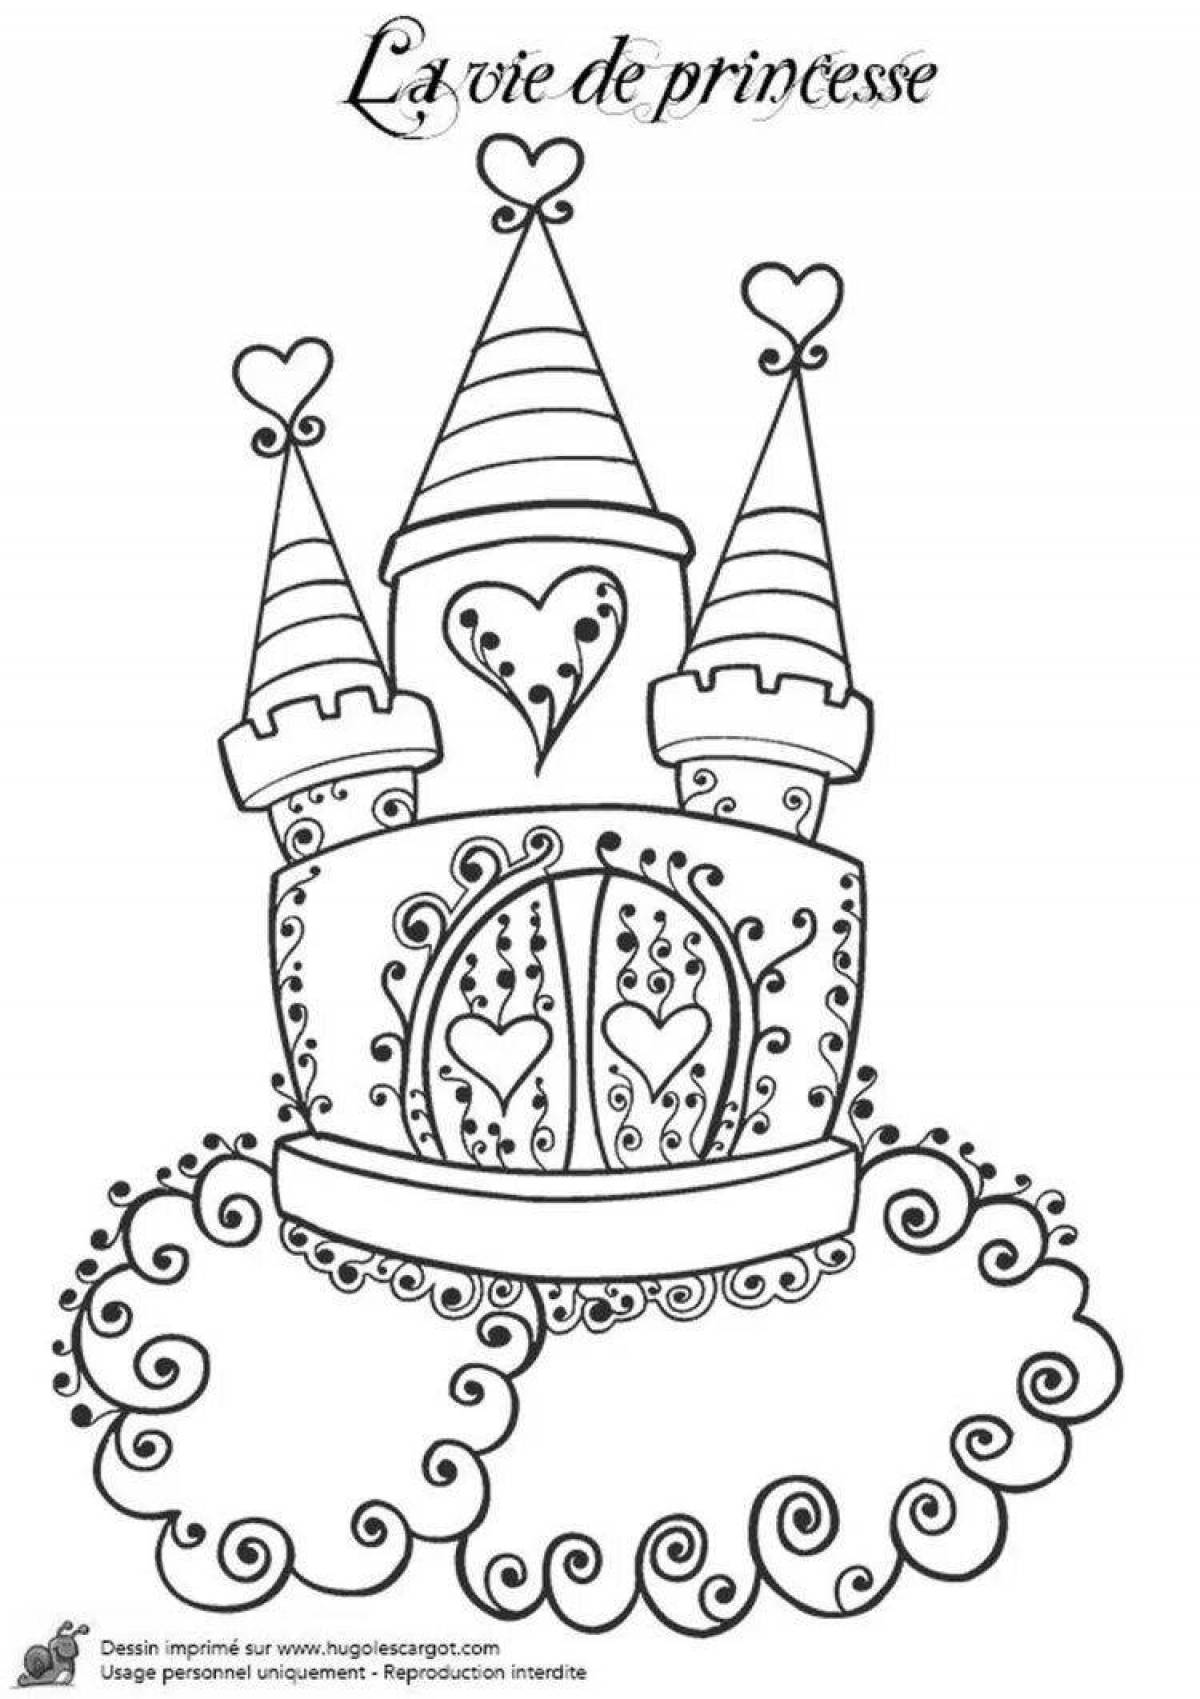 Palace coloring book for girls princess castle